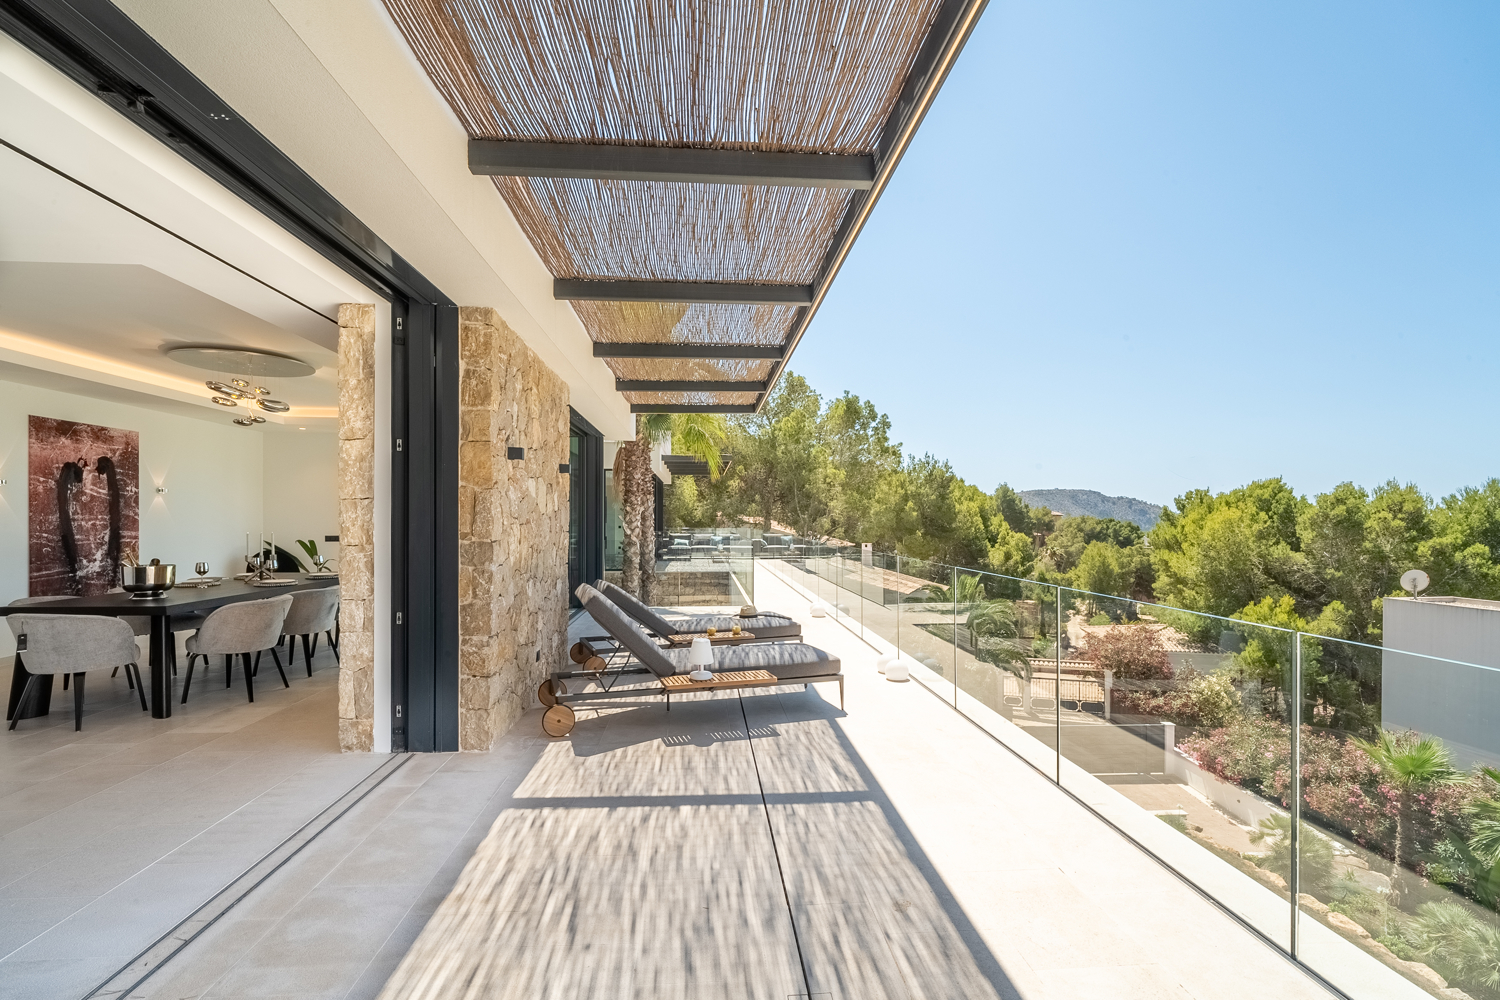 High-quality new-build villa in picturesque location